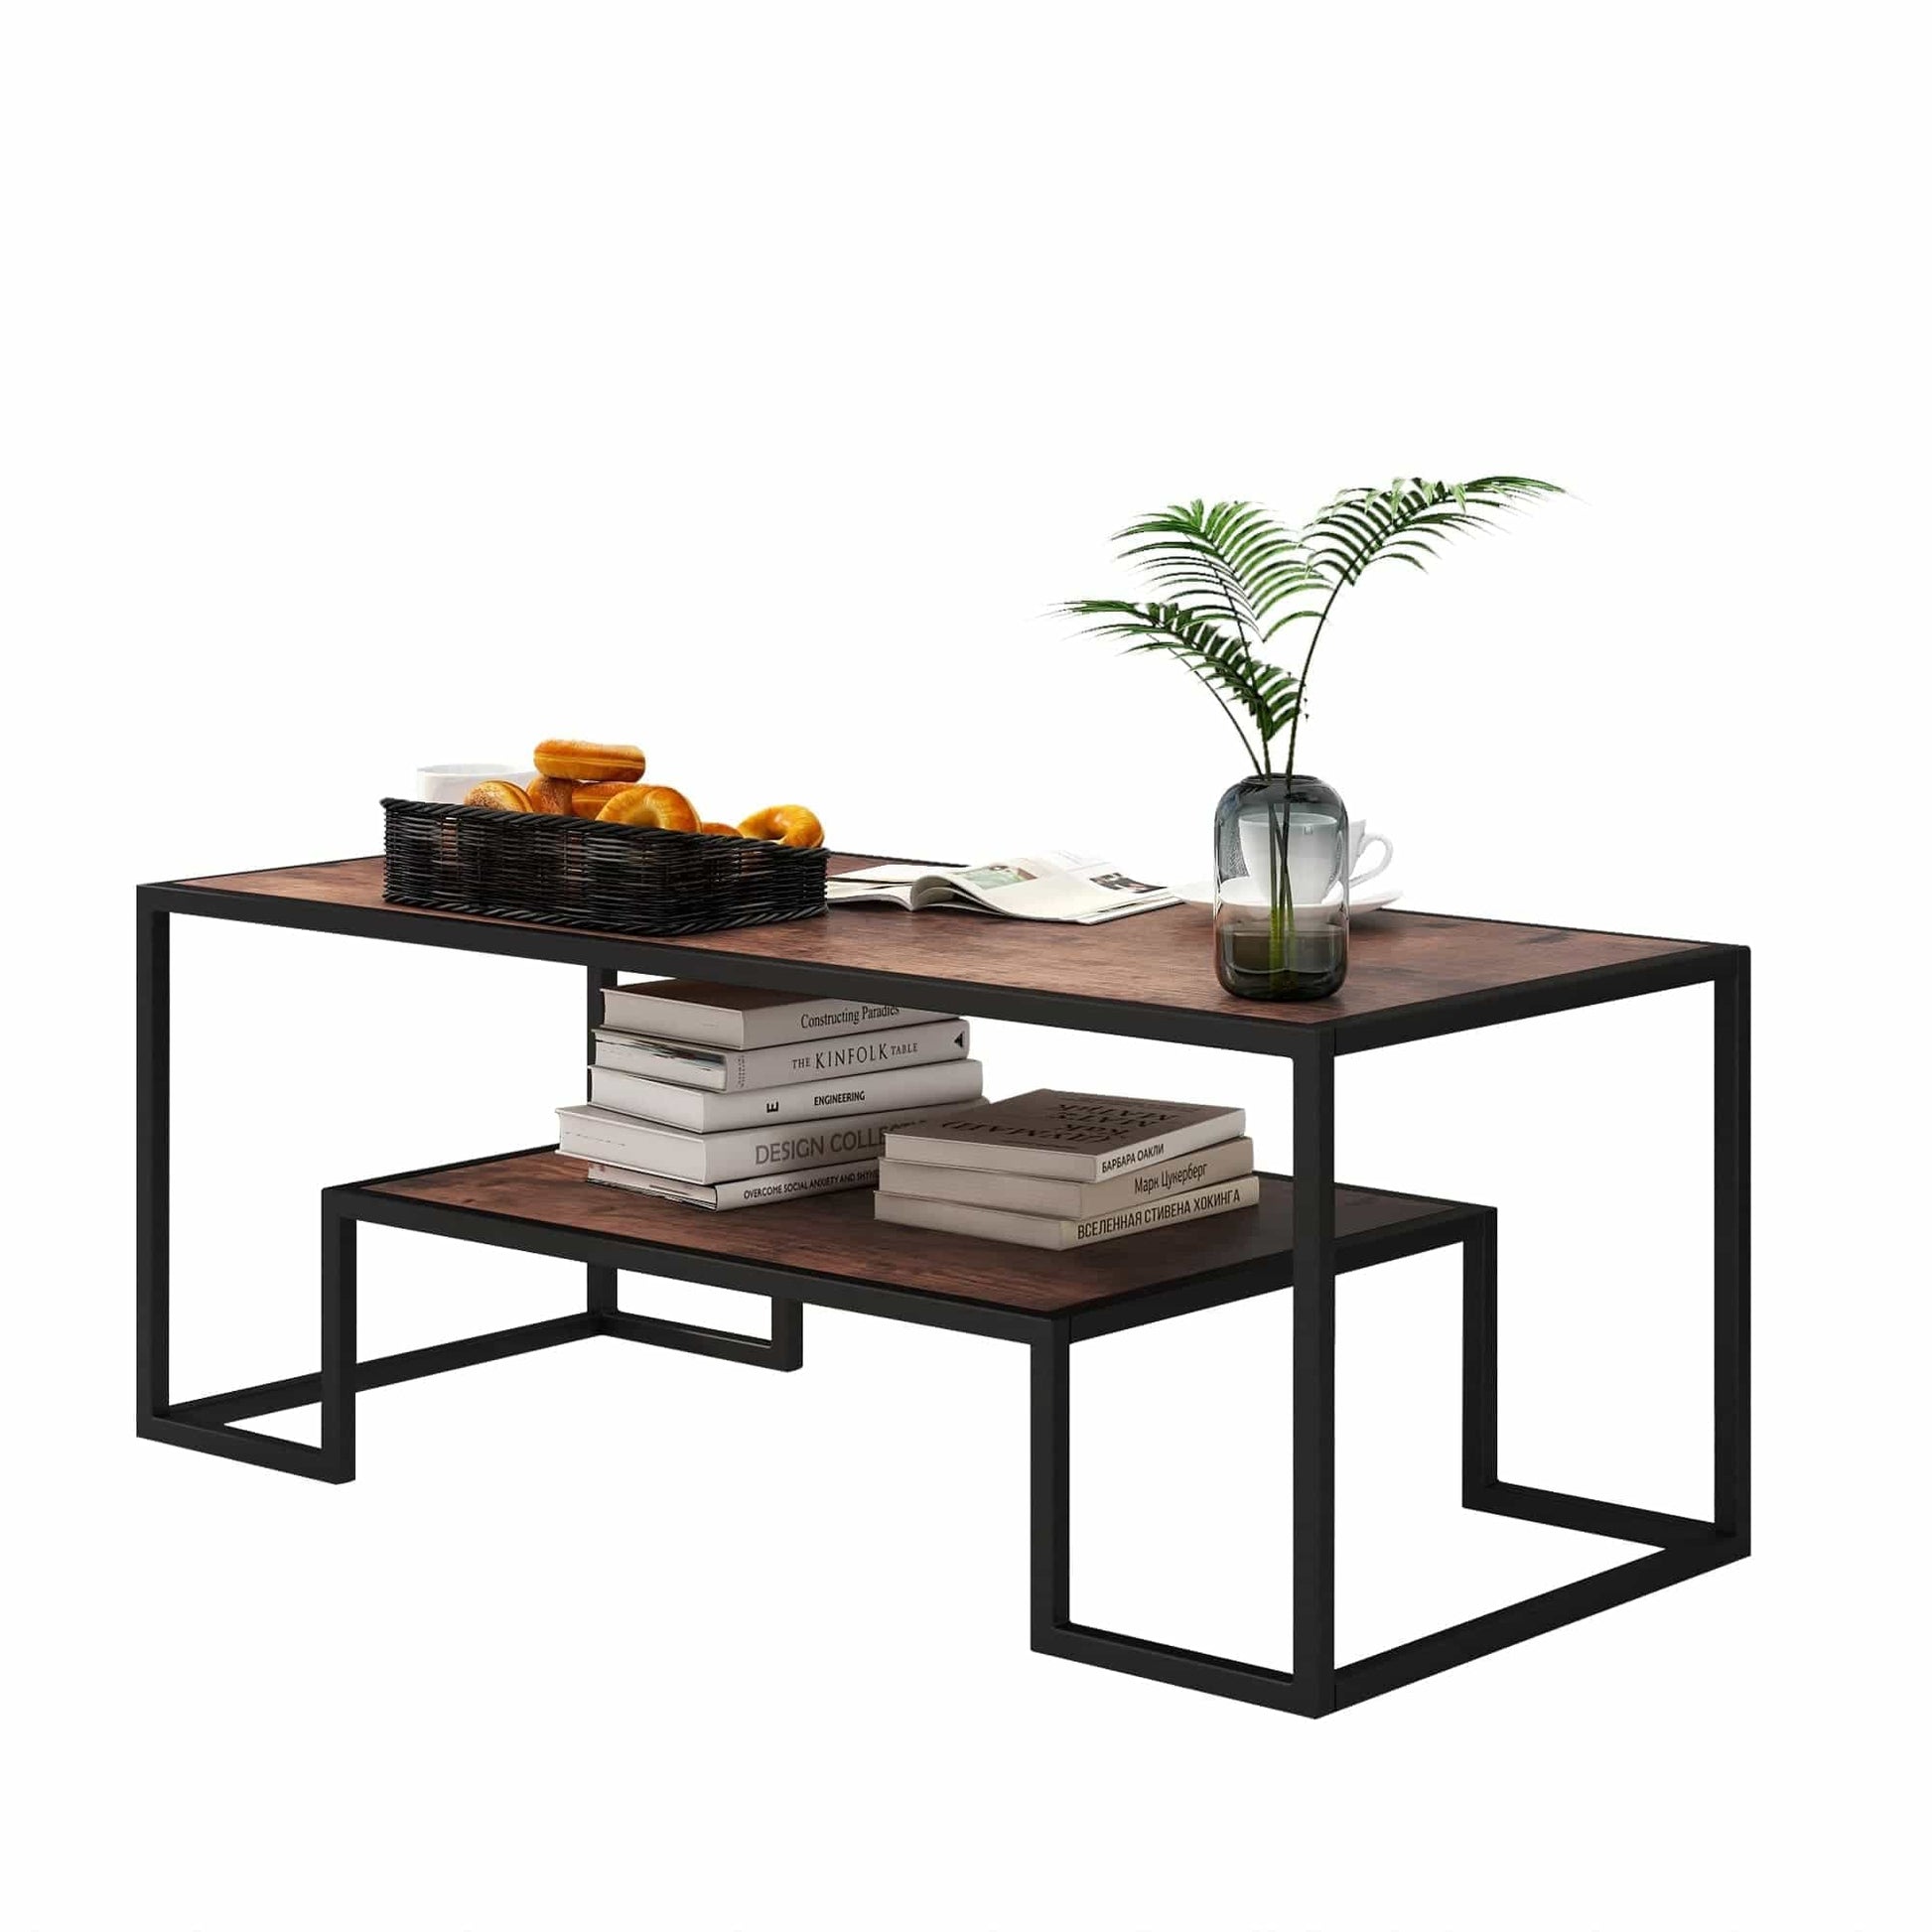 TFC&H Co. Modern Geometric-Inspired Wood Coffee Table- Ships from The US - coffee table at TFC&H Co.